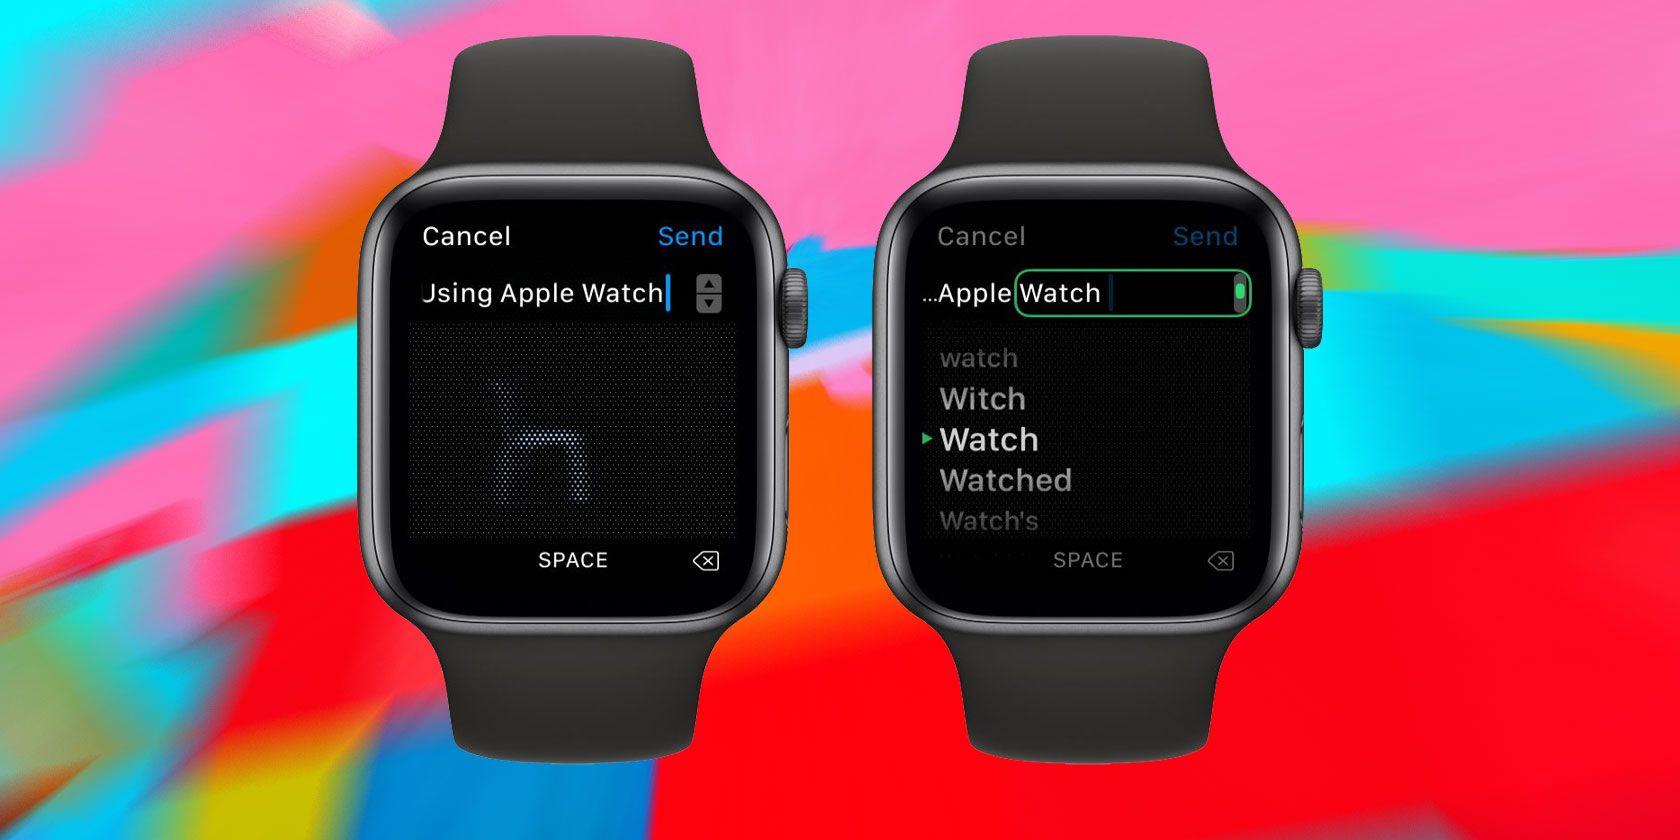 How to Write Short Messages on Your Apple Watch With Scribble